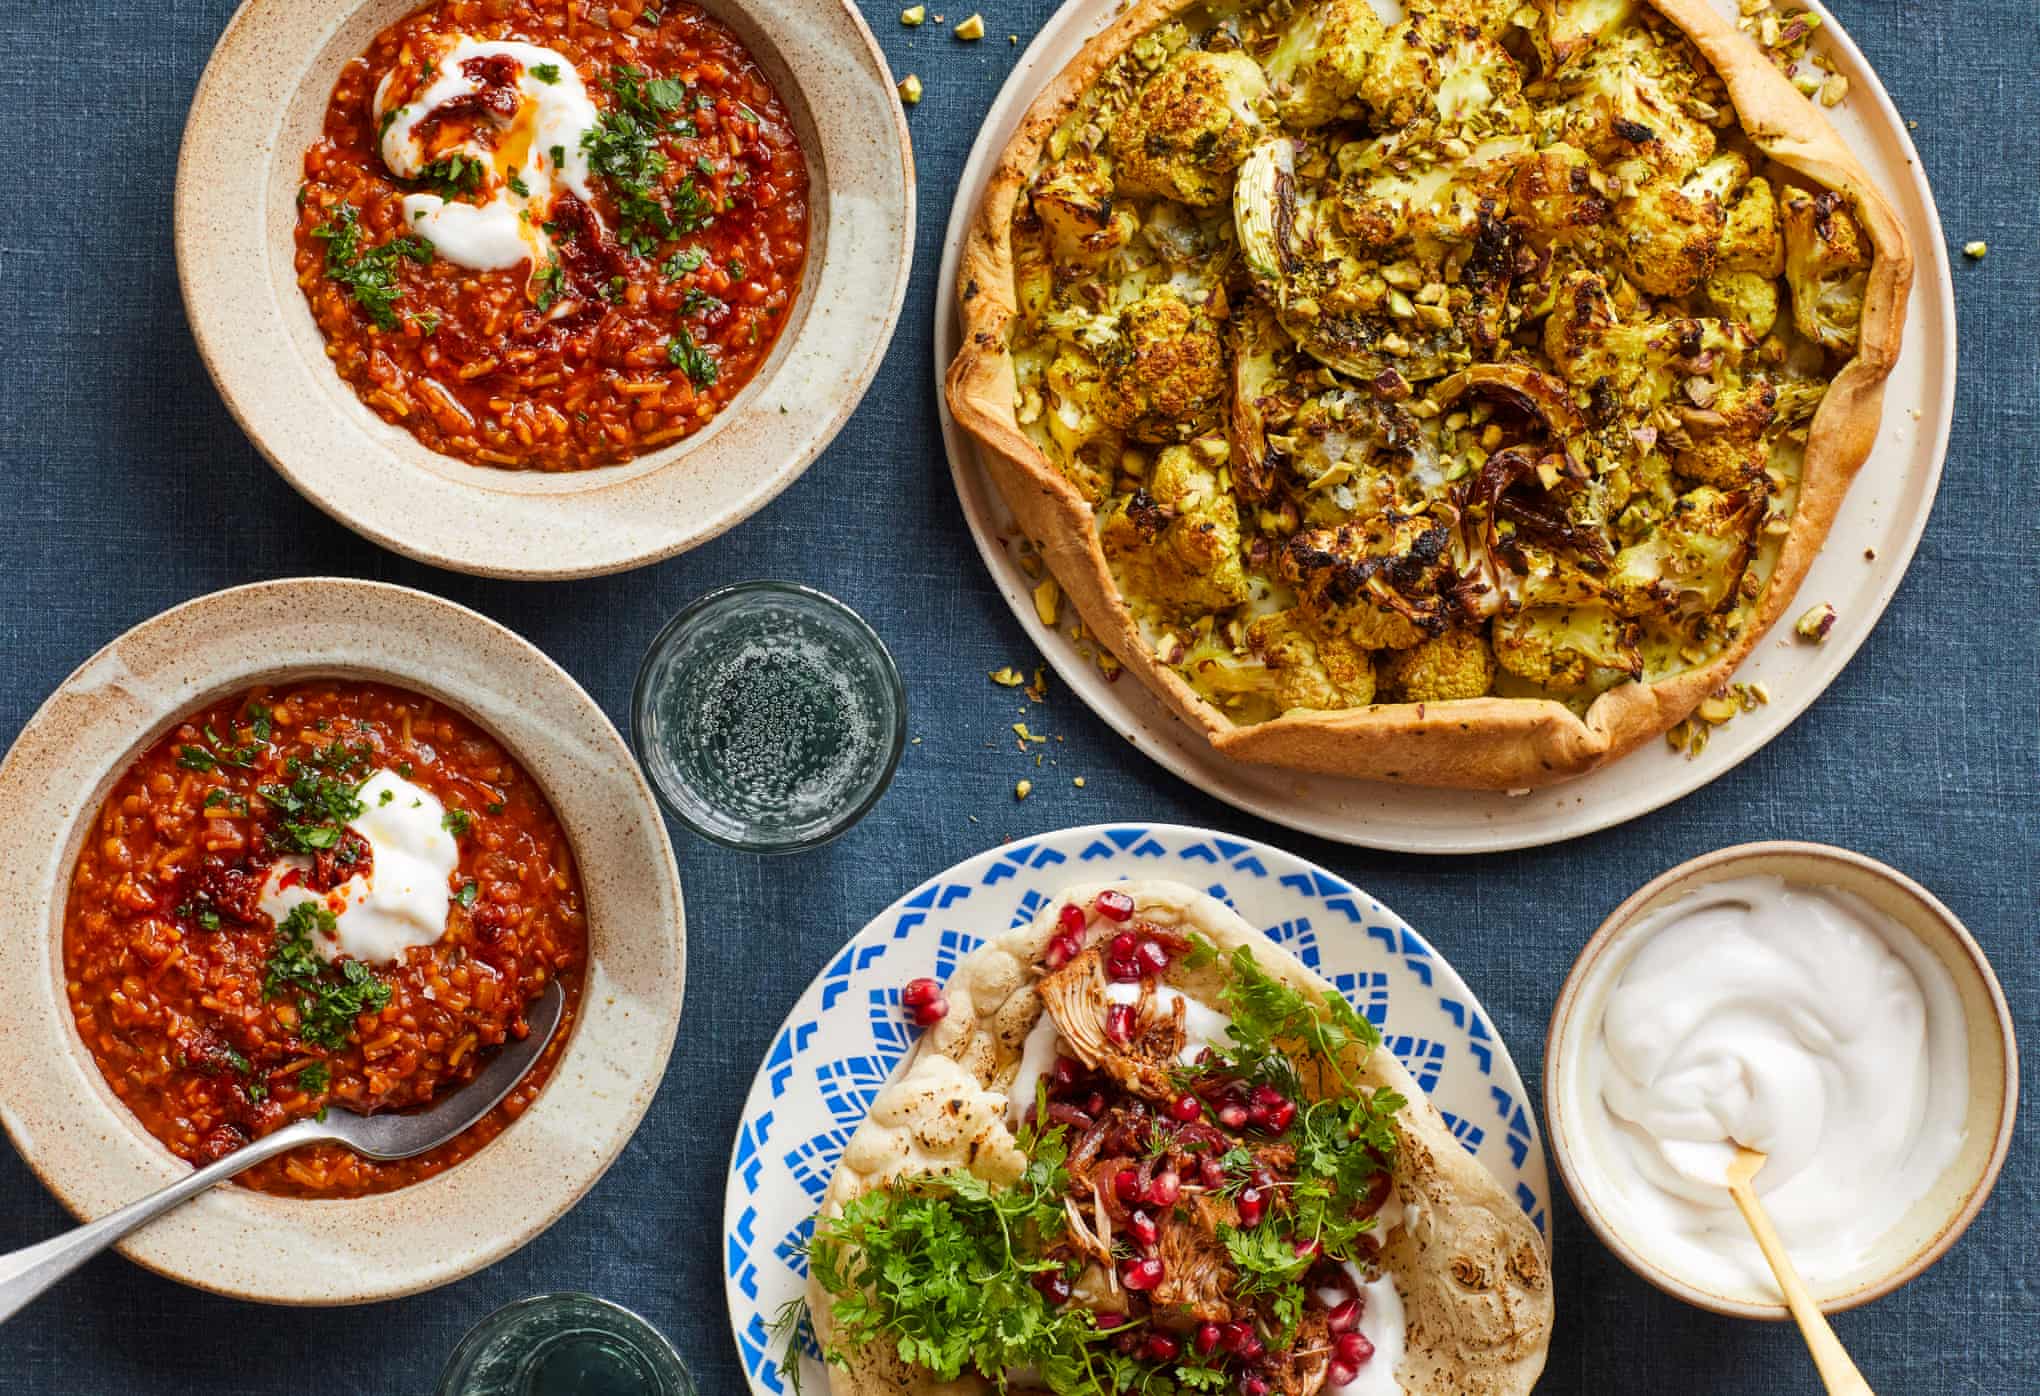 (L to R) Red lentil harira, jackfruit walnut wraps, Chermoula cauliflower galette. Photograph: Ola O Smit/The Guardian. Food styling: Tamara Vos. Prop styling: Anna Wilkins. Food styling assistant: Florence Blair.